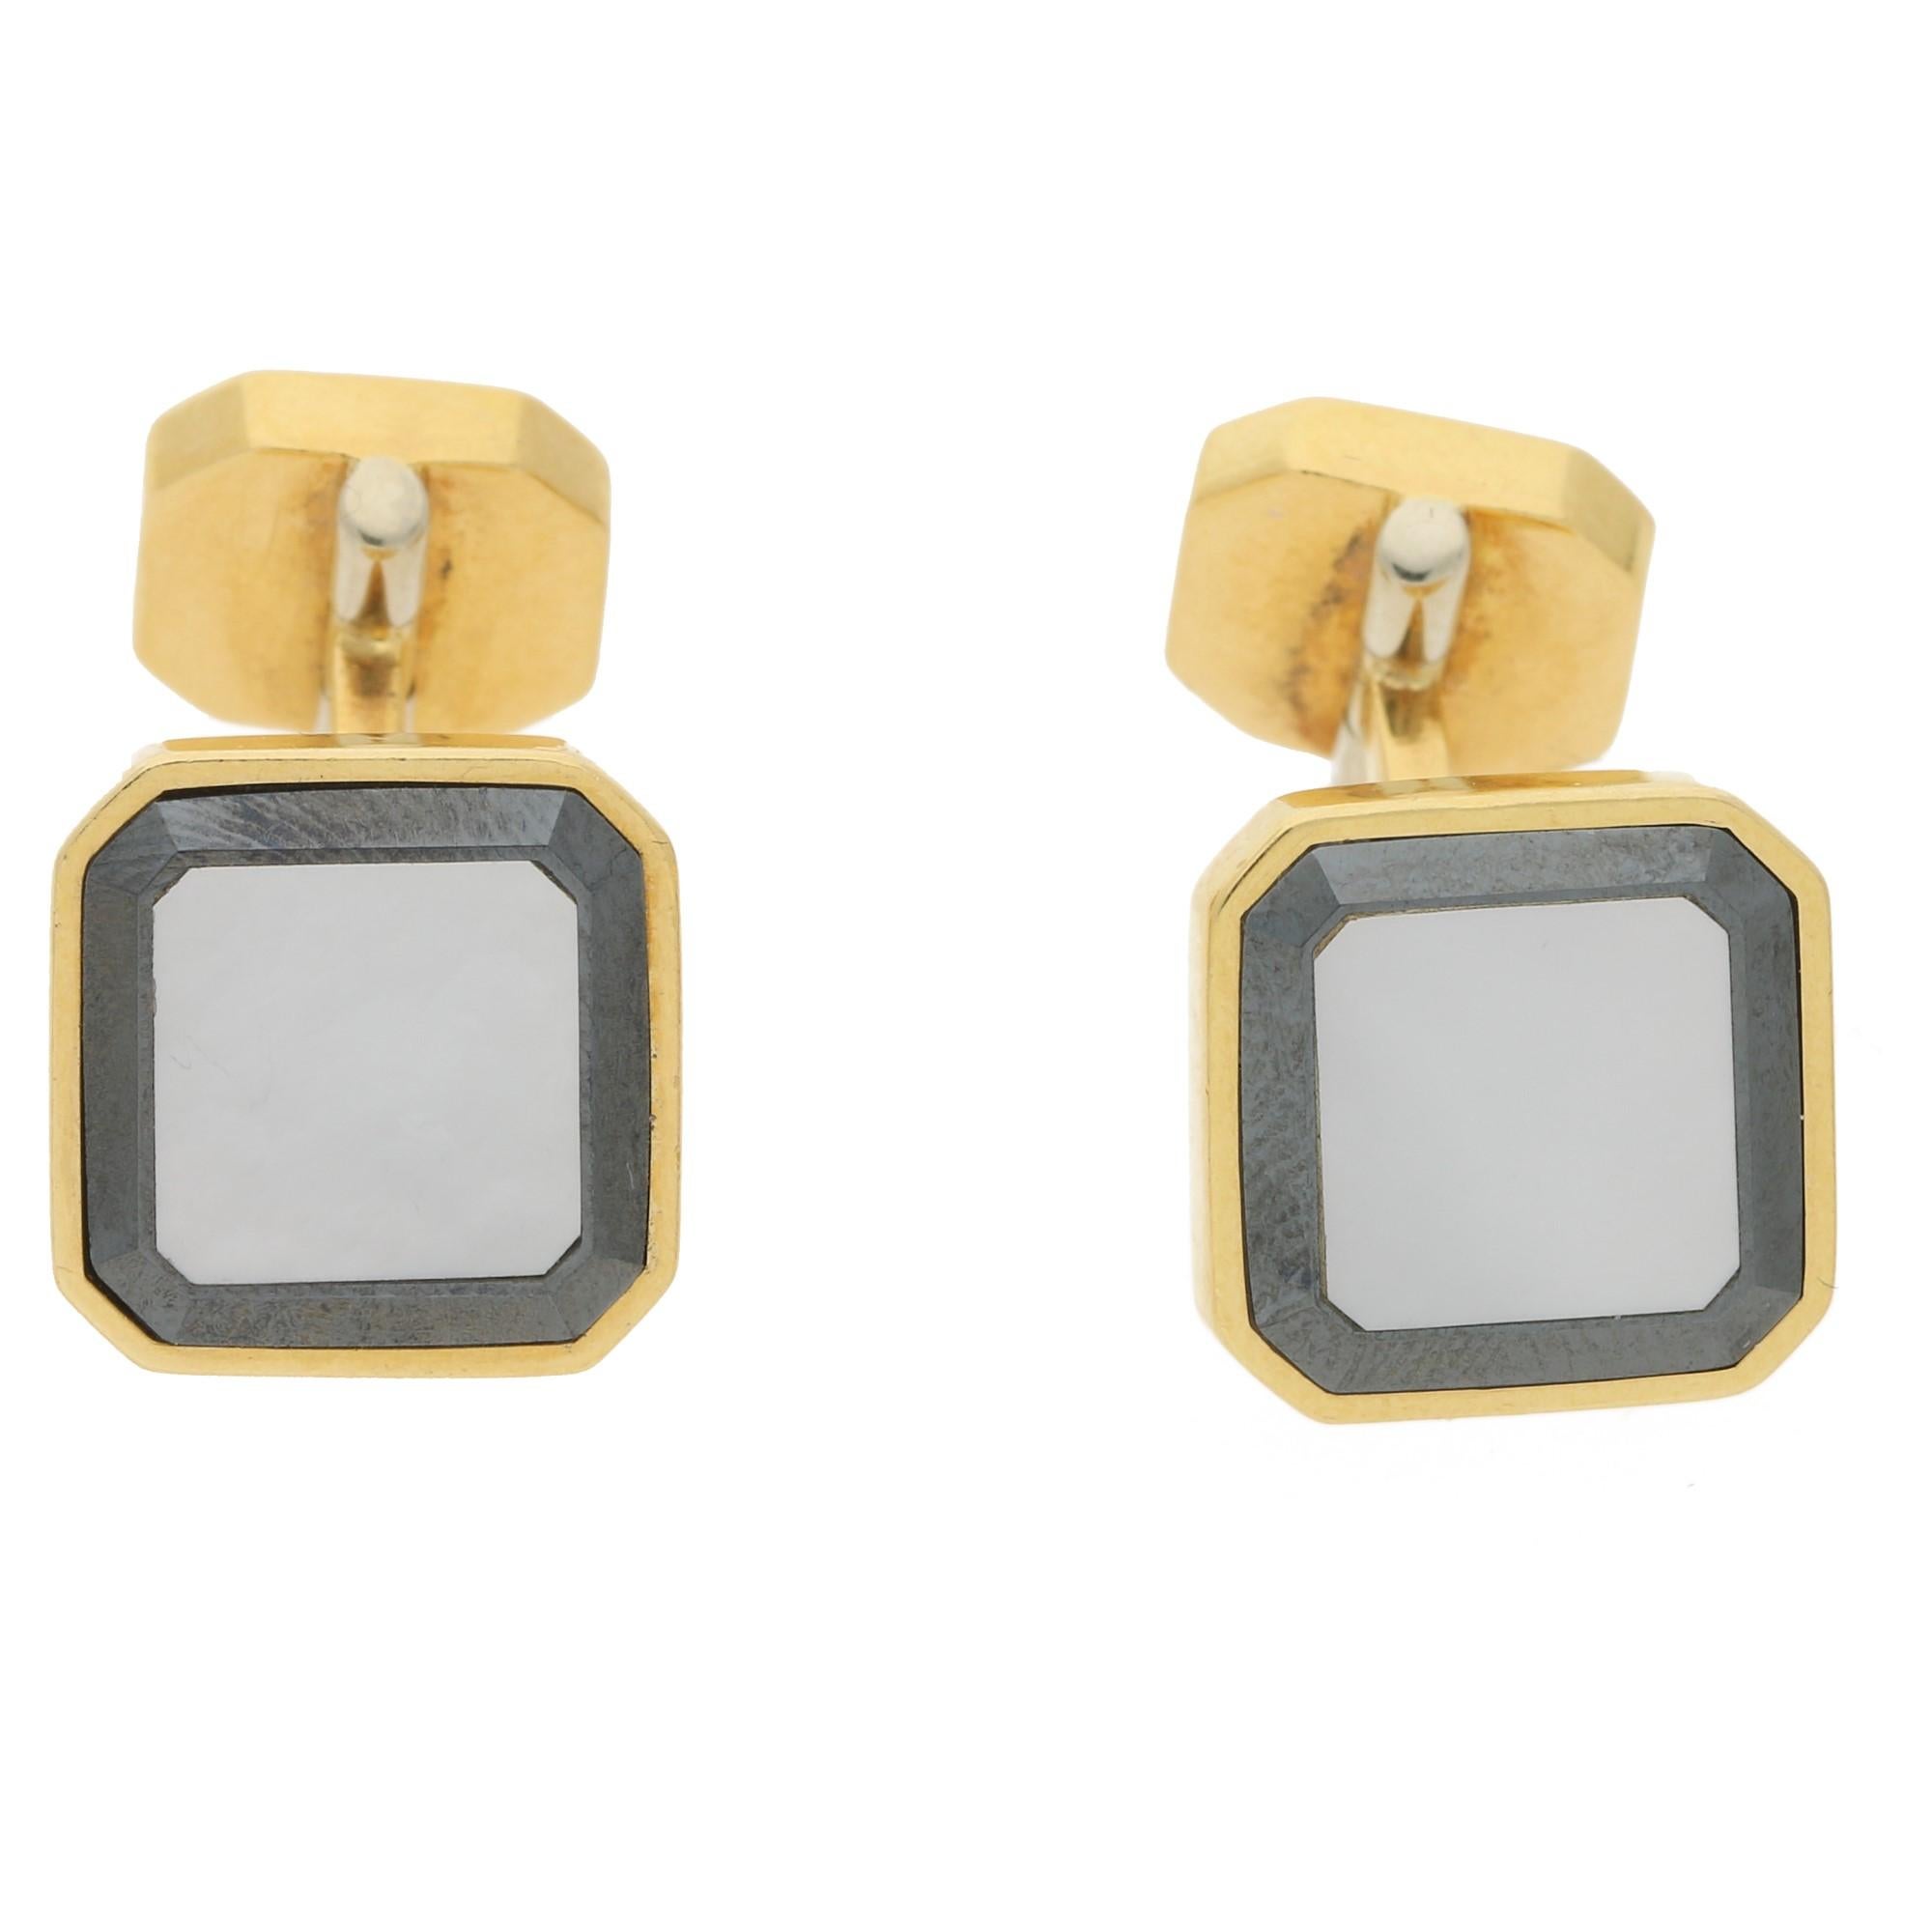 Vintage Piaget Cufflinks in 18 Carat Yellow Gold with Onyx and Mother-of-Pearl